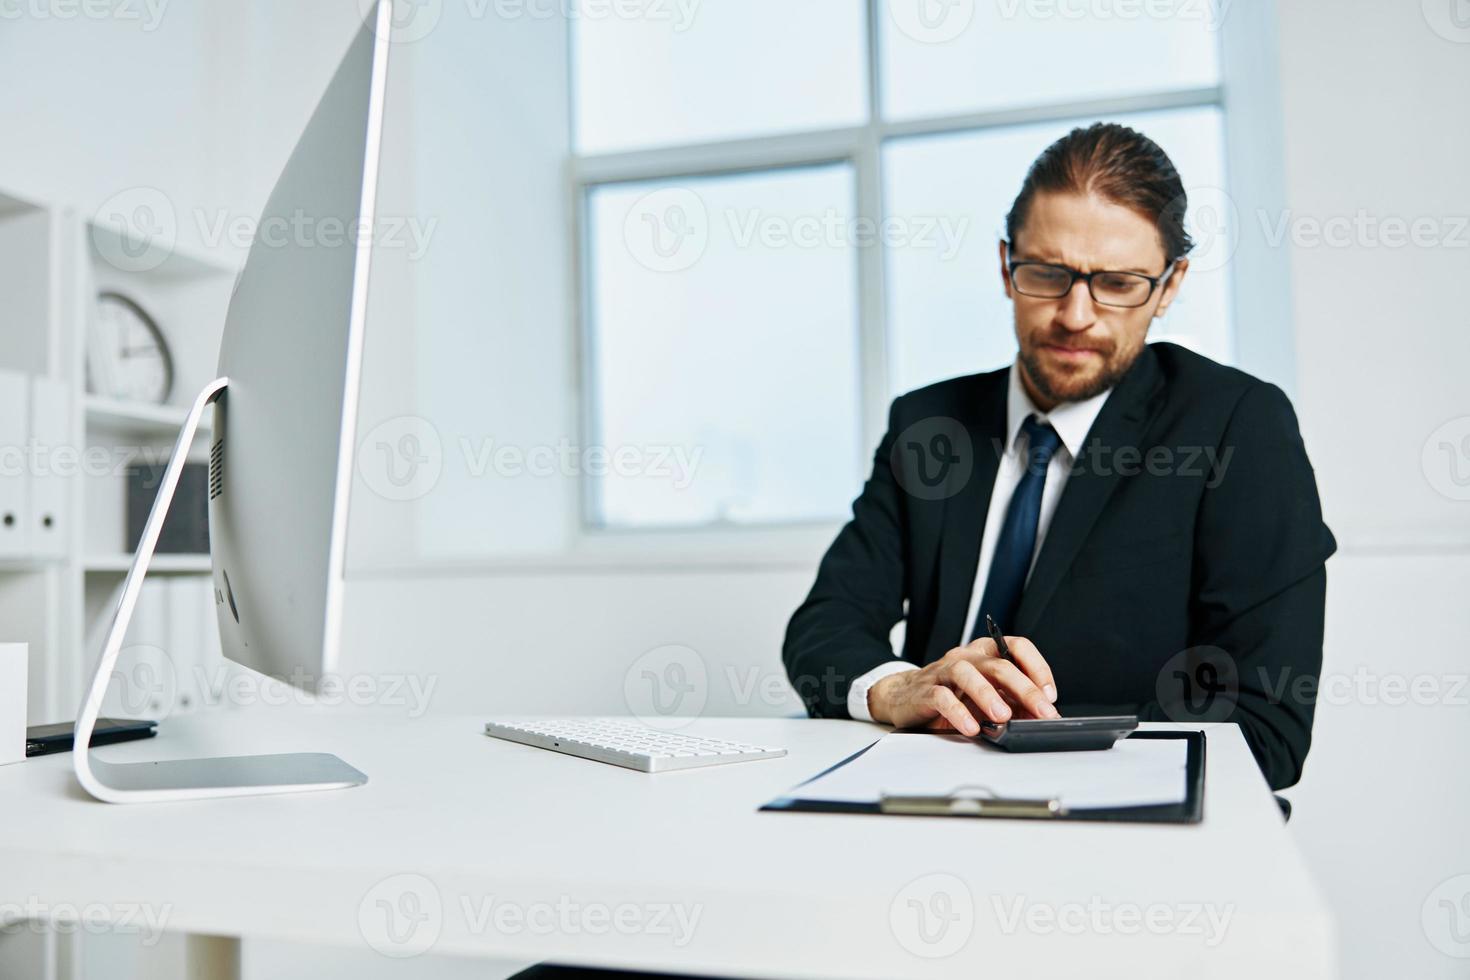 man in a suit documents in hand communication by phone Lifestyle photo